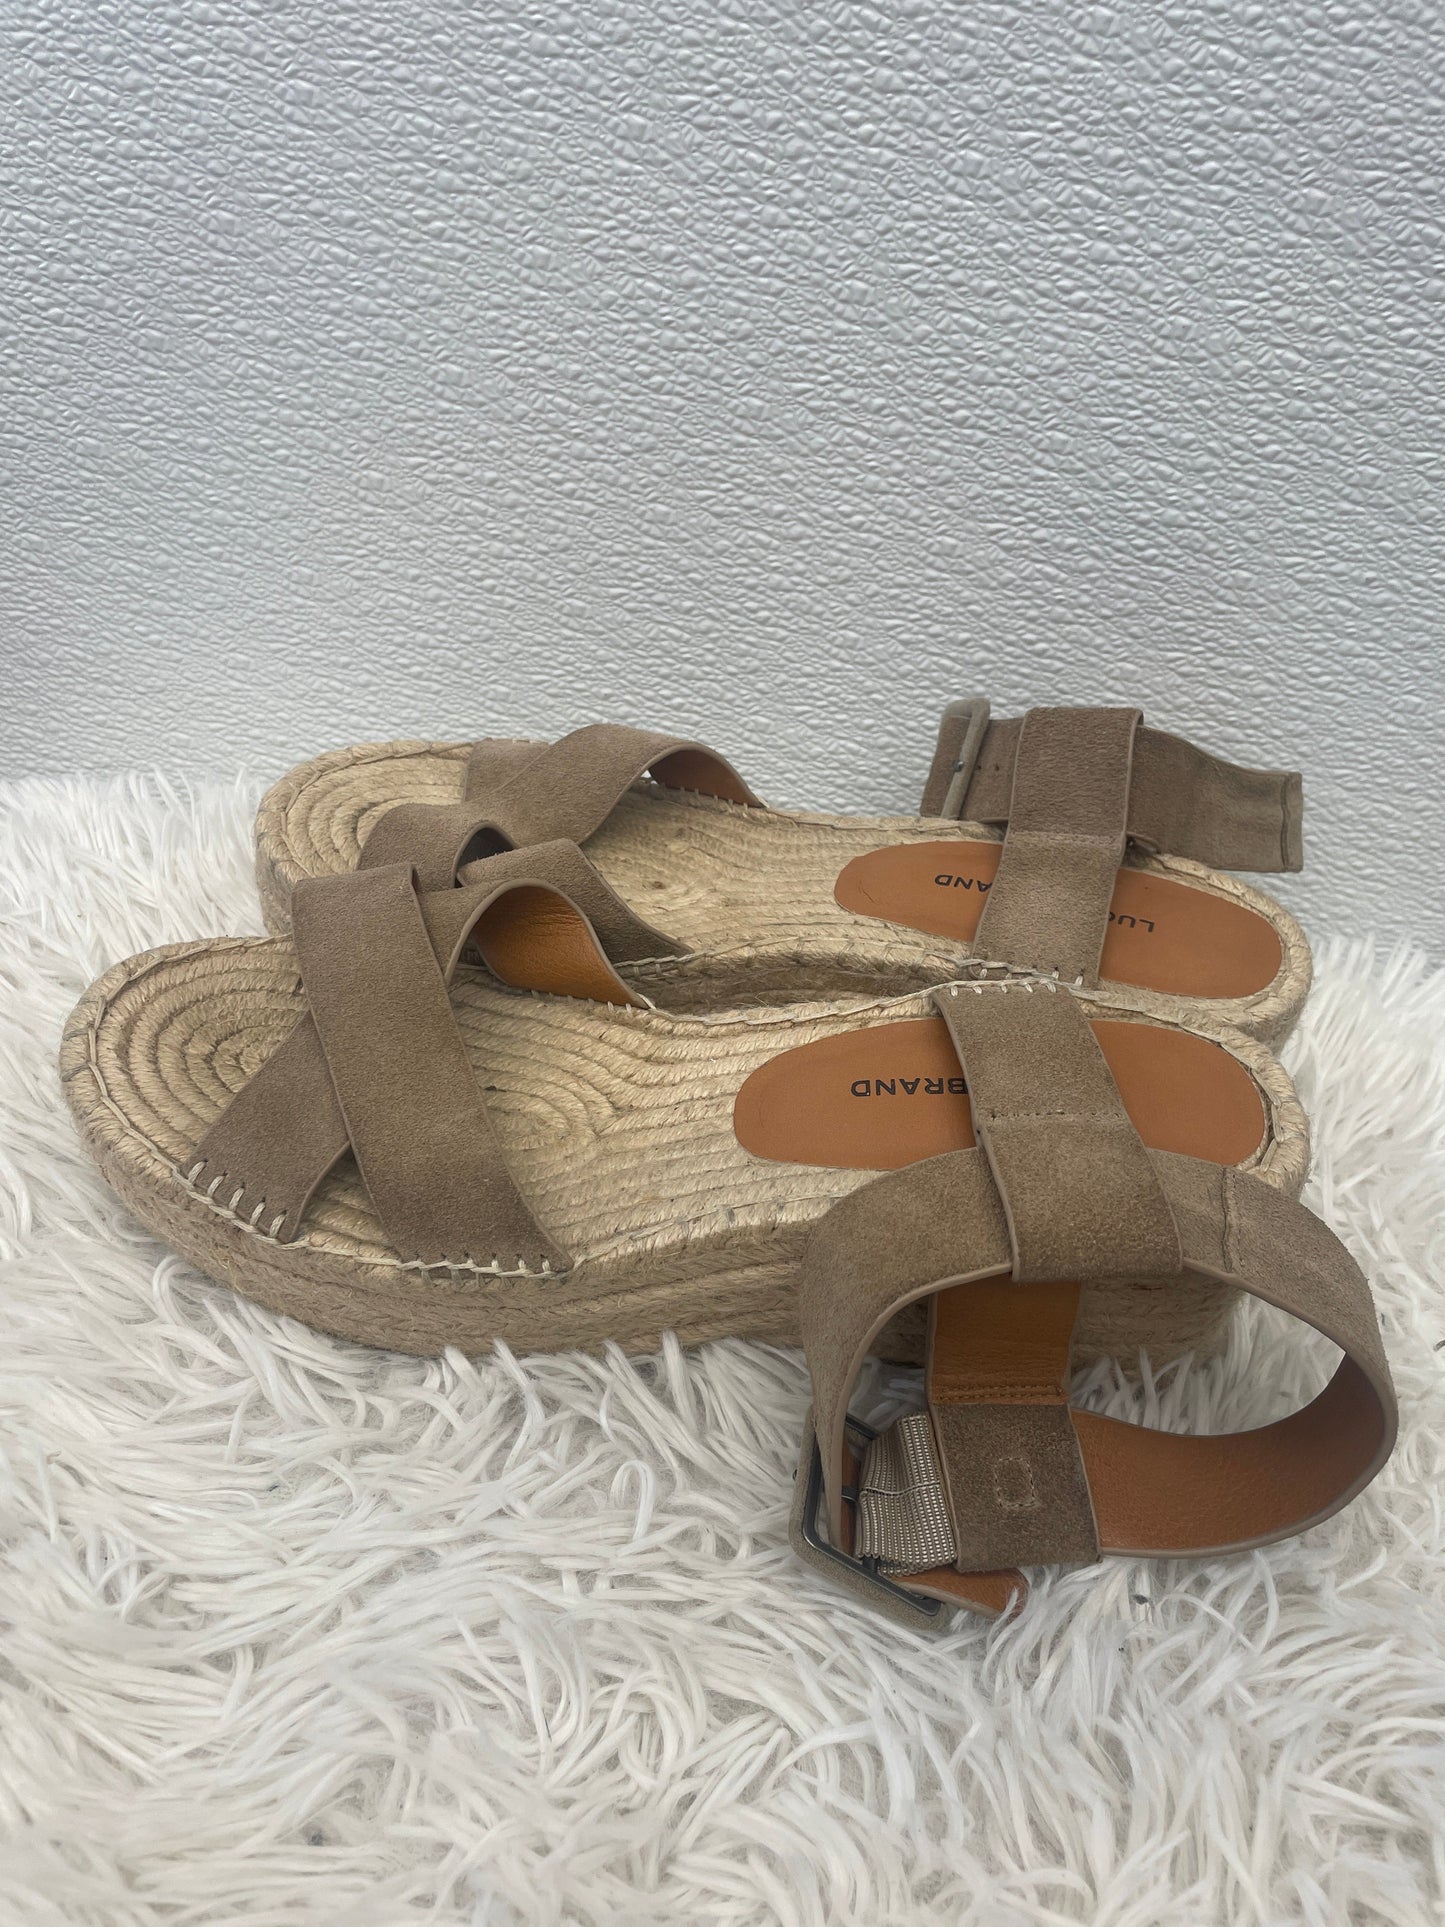 Sandals Heels Wedge By Lucky Brand  Size: 11